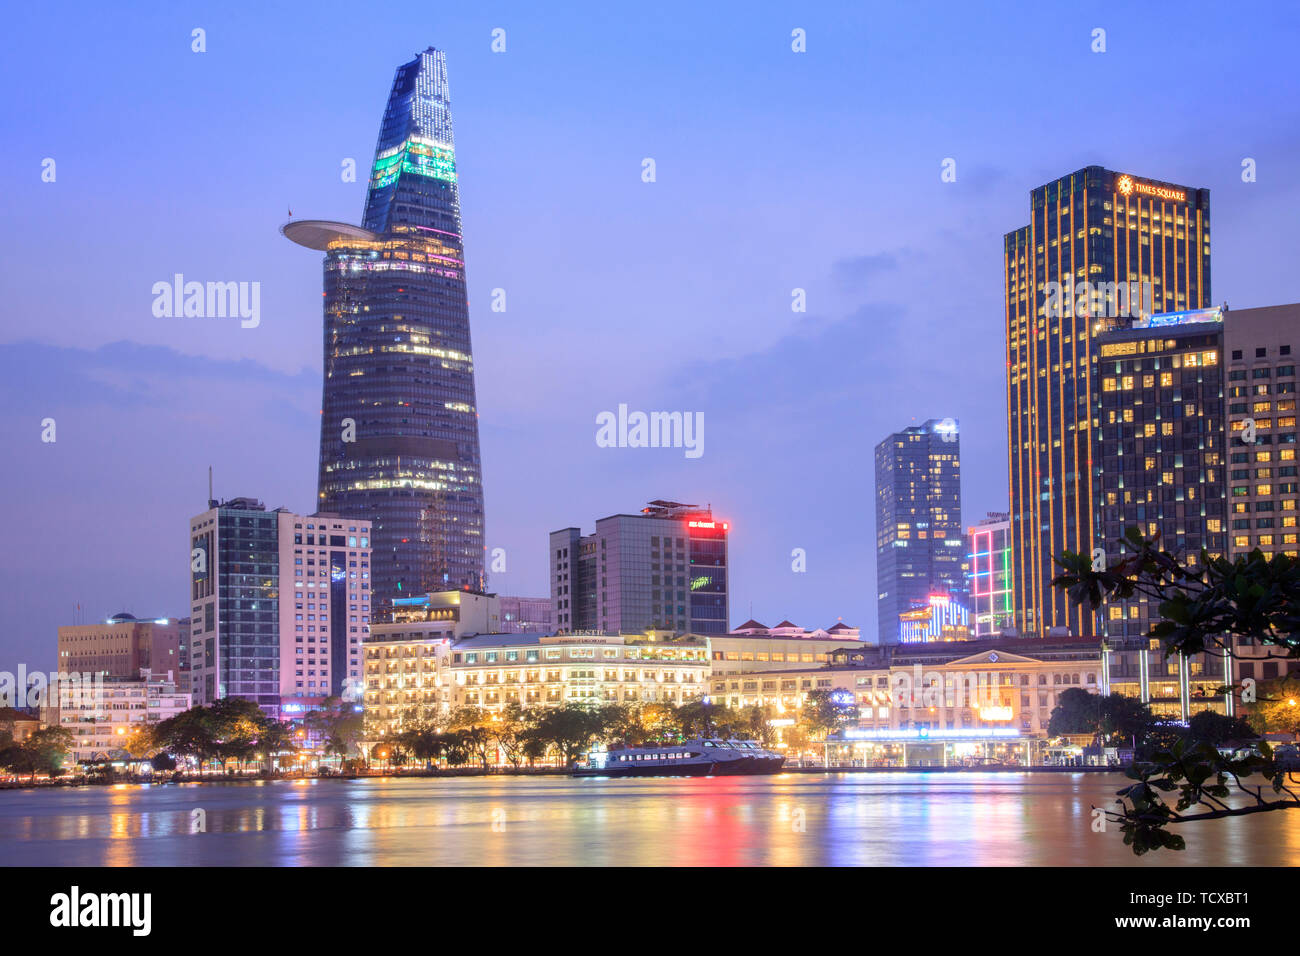 The skyline of the Central Business District of Ho Chi Minh City showing the Bitexco tower and the Saigon River, Ho Chi Minh City, Vietnam Stock Photo